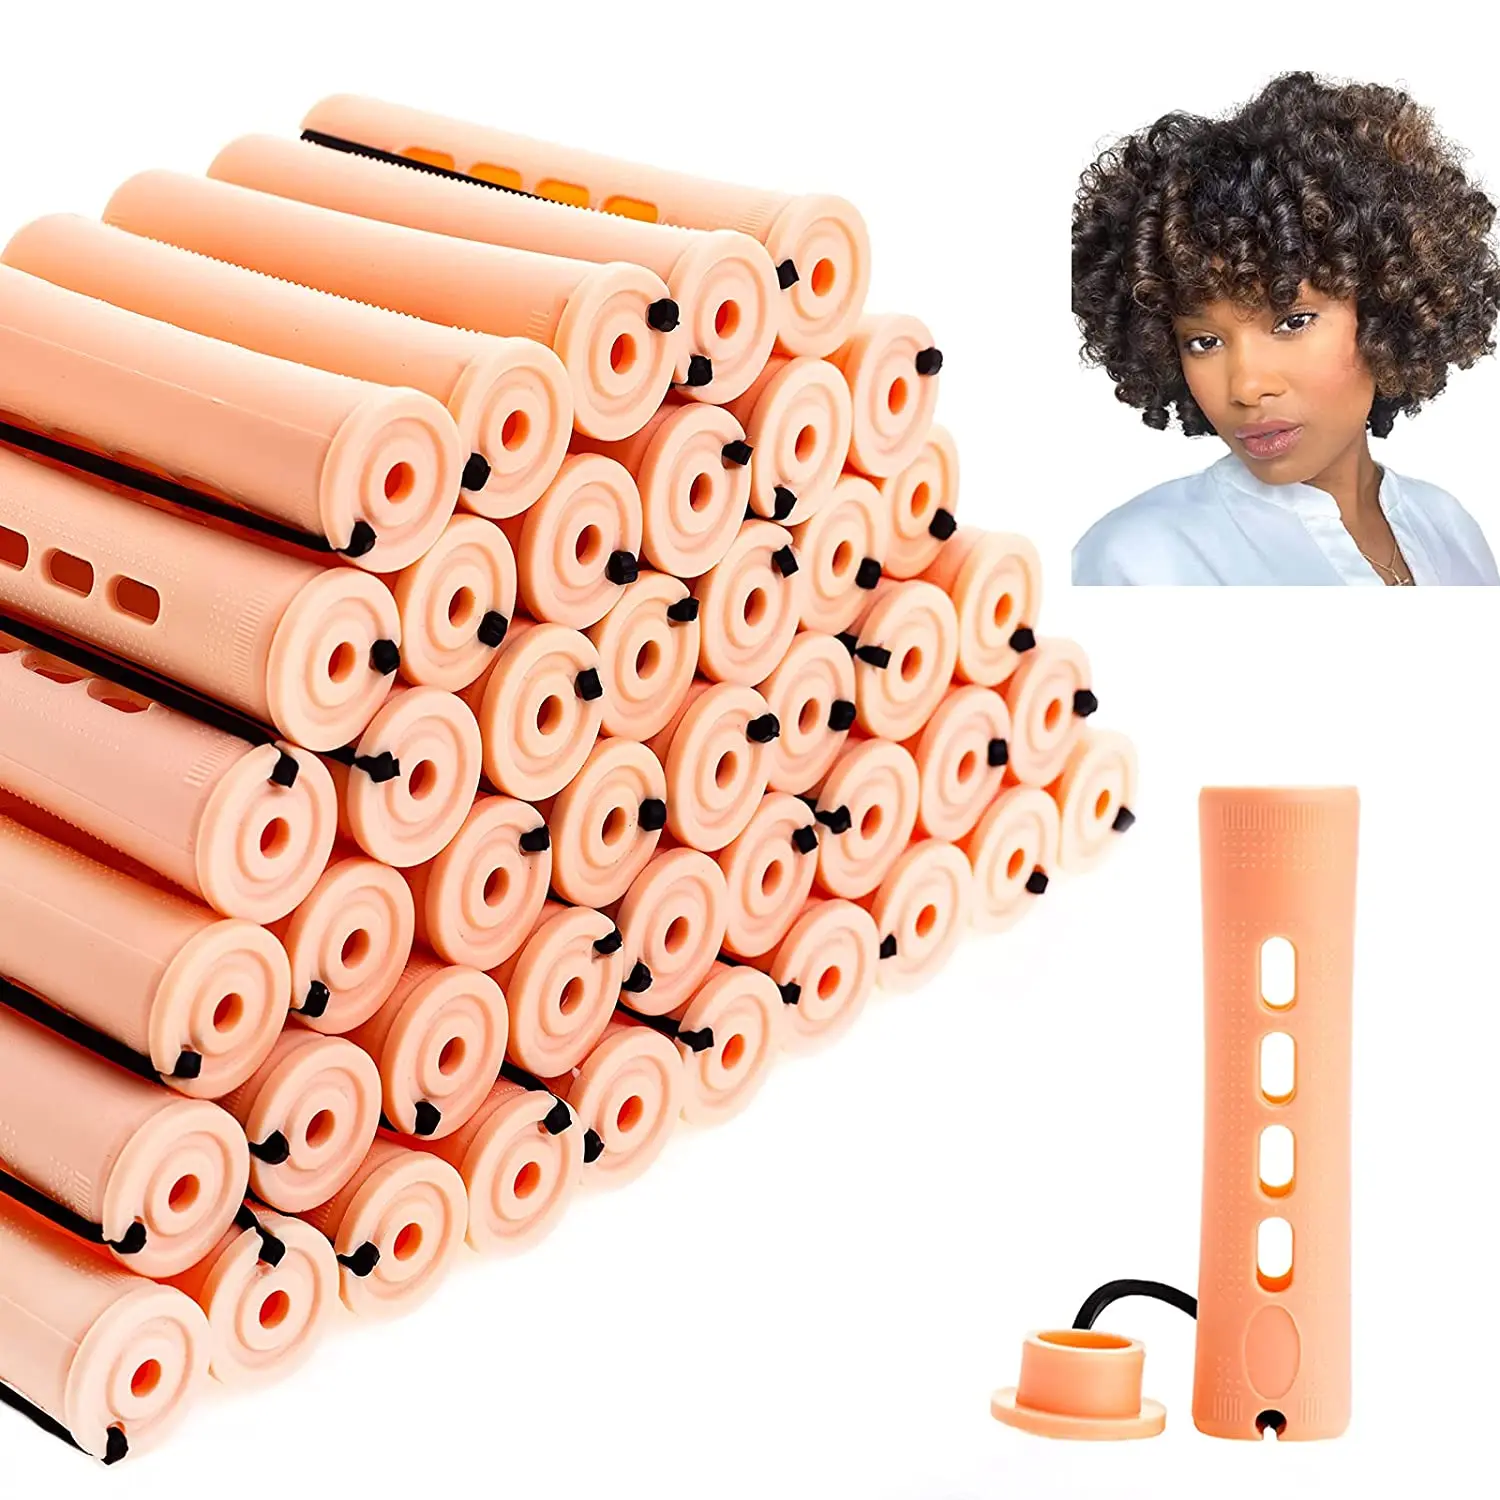 Perm Rods 10 Pcs Set Hair Rollers Large Long Short Hair Styling Tool Hair  Curlers For Girls - Buy Hair Rollers,No Heat Curling Roller,Hair Styling  Tool Product on 